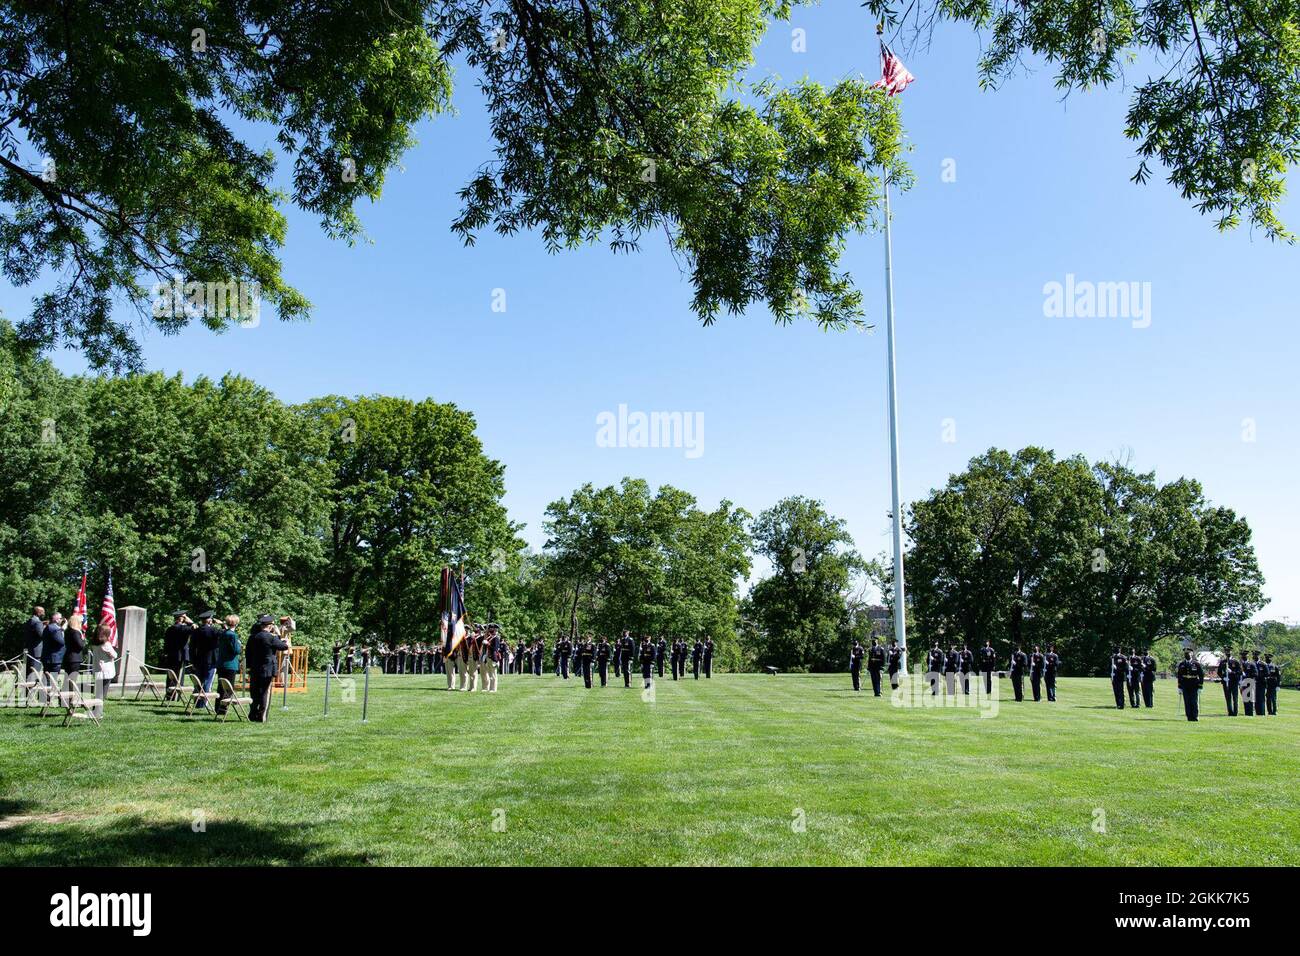 U.S. Soldiers assigned to the 3rd U.S. Infantry Regiment (The Old Guard) participate in an Army Full Honor Arrival Ceremony welcoming General Sir Mark Alexander Carleton-Smith, the chief of the General Staff of the British Army, at Whipple Field, Joint Base Myer-Henderson Hall, Arlington, Va., May 13, 2021.   Chief of Staff of the U.S. Army Gen. James C. McConville hosted the event. Stock Photo